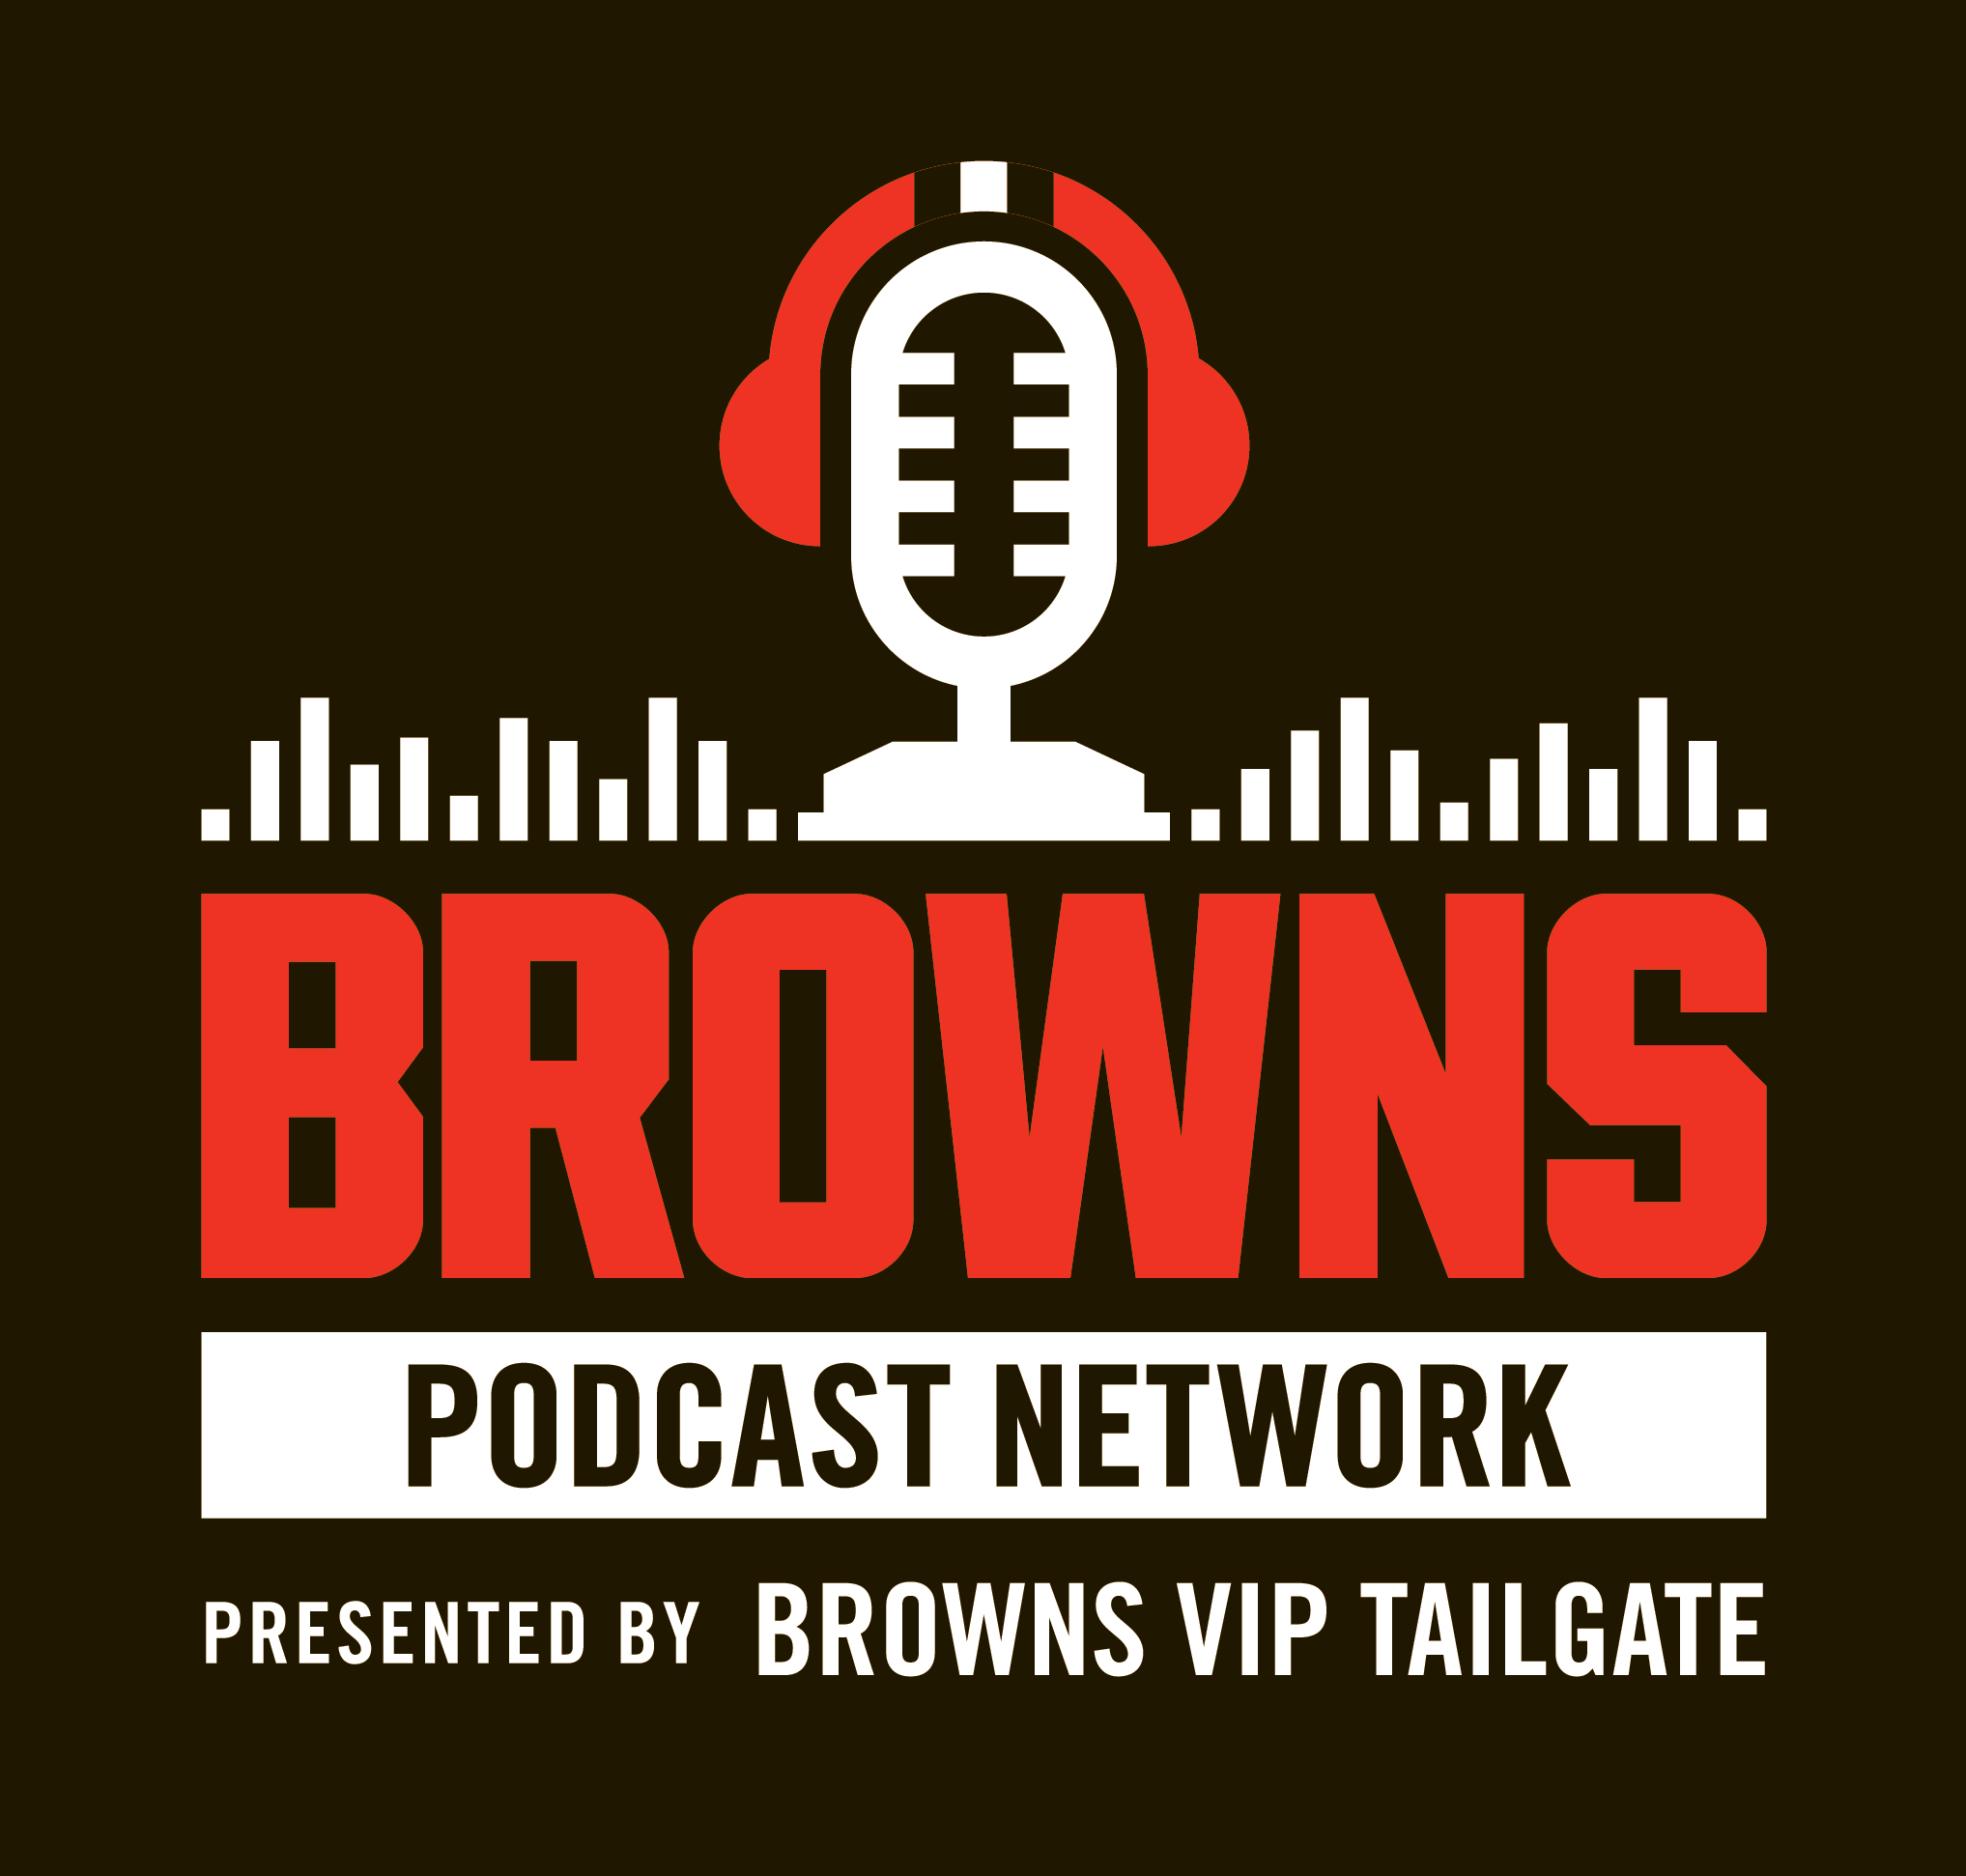 Cleveland Browns Daily – Browns Legend Joe Thomas joins on a reaction Monday